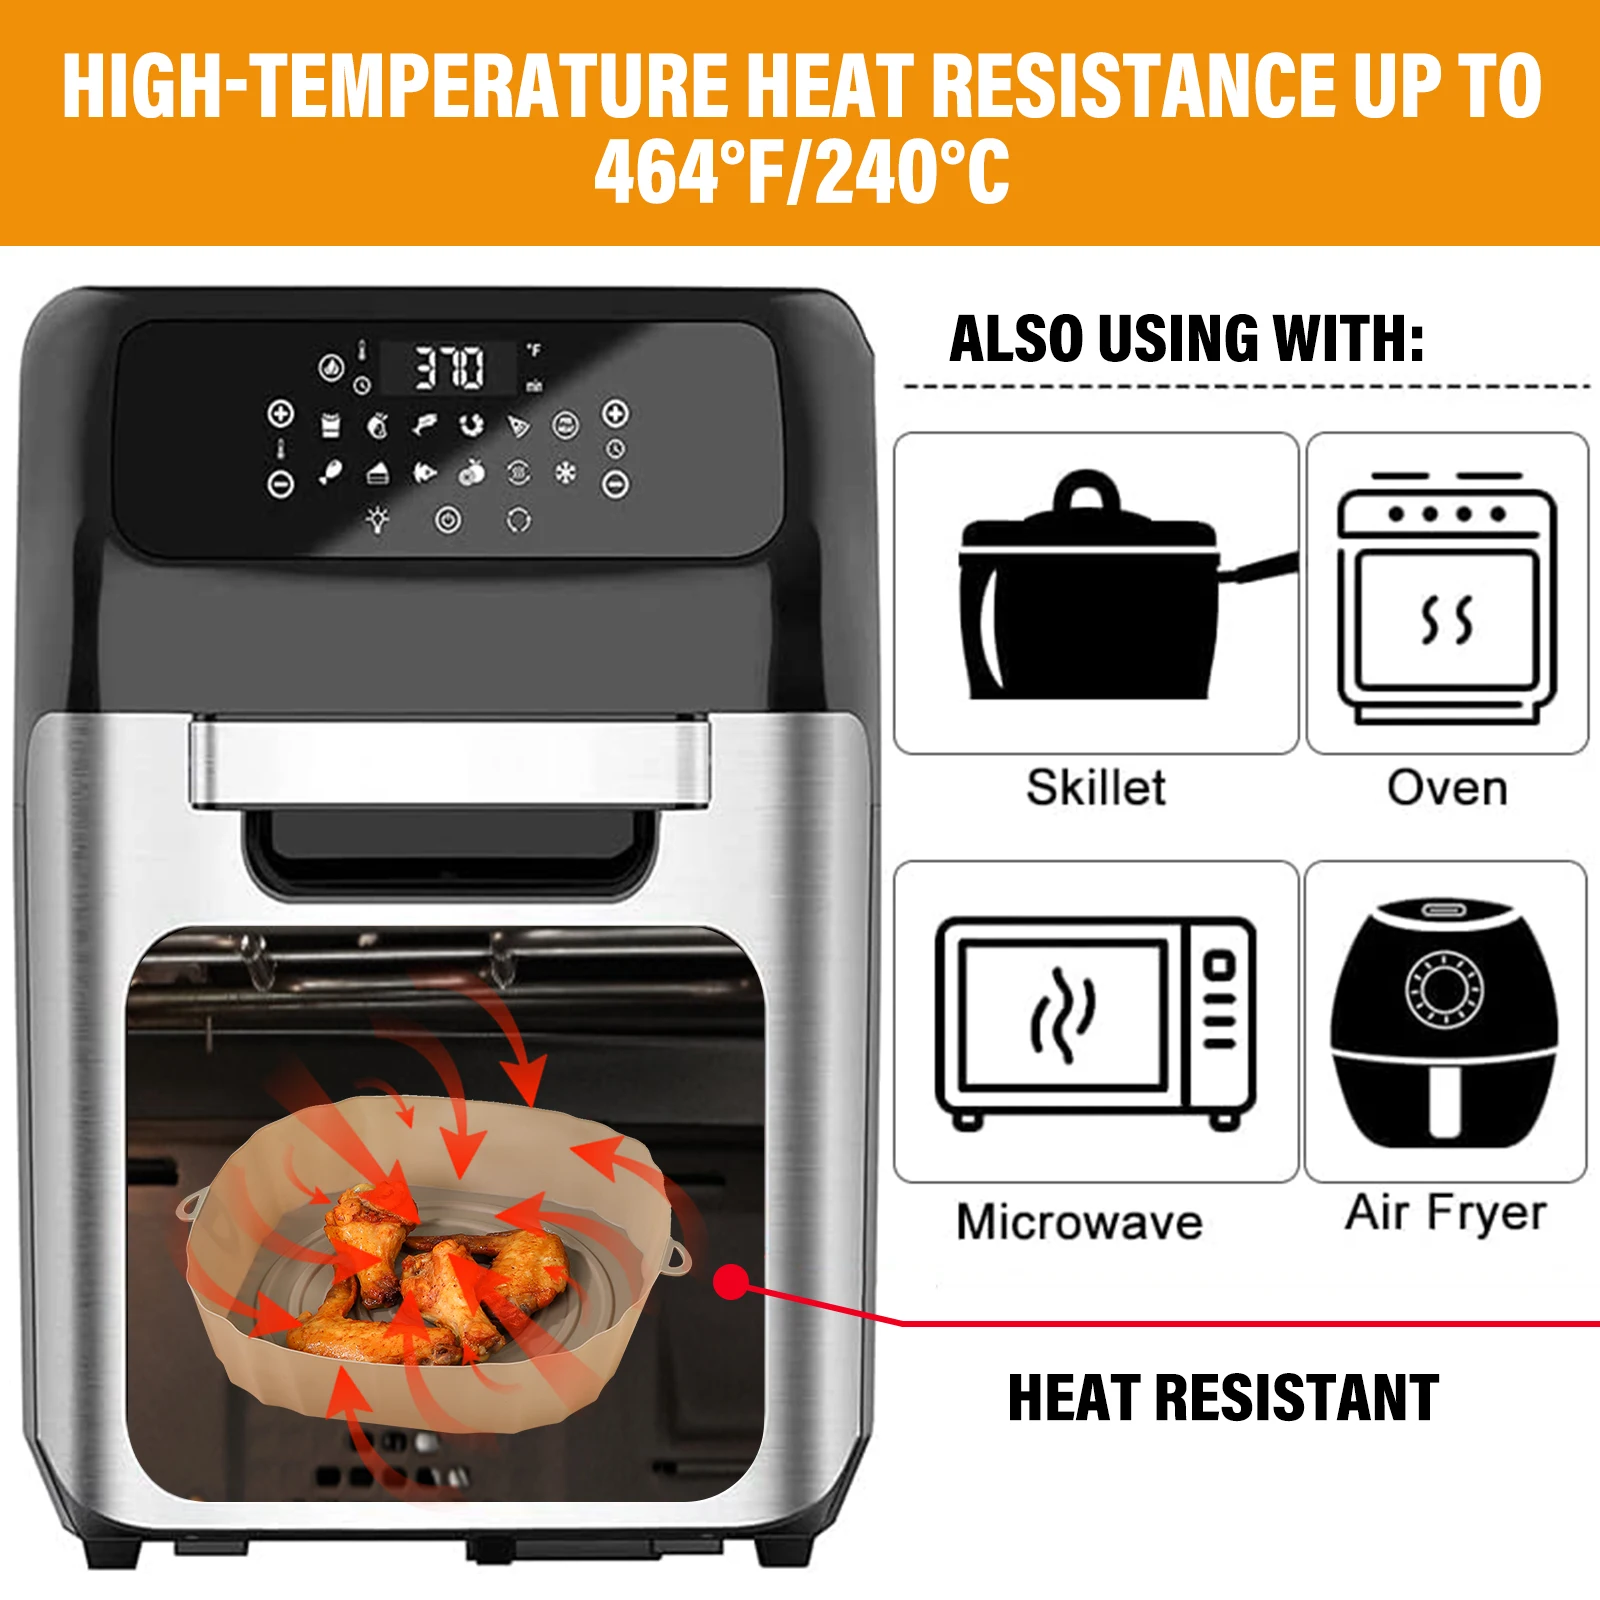 https://ae01.alicdn.com/kf/S4ad123d5bc5841e682a00f6acf94bbb4B/1-2Pcs-Air-Fryer-Pizza-Silicone-Mold-For-Air-Fryer-Pan-Nonstick-Airfryer-Silicone-Basket-Kitchen.jpg